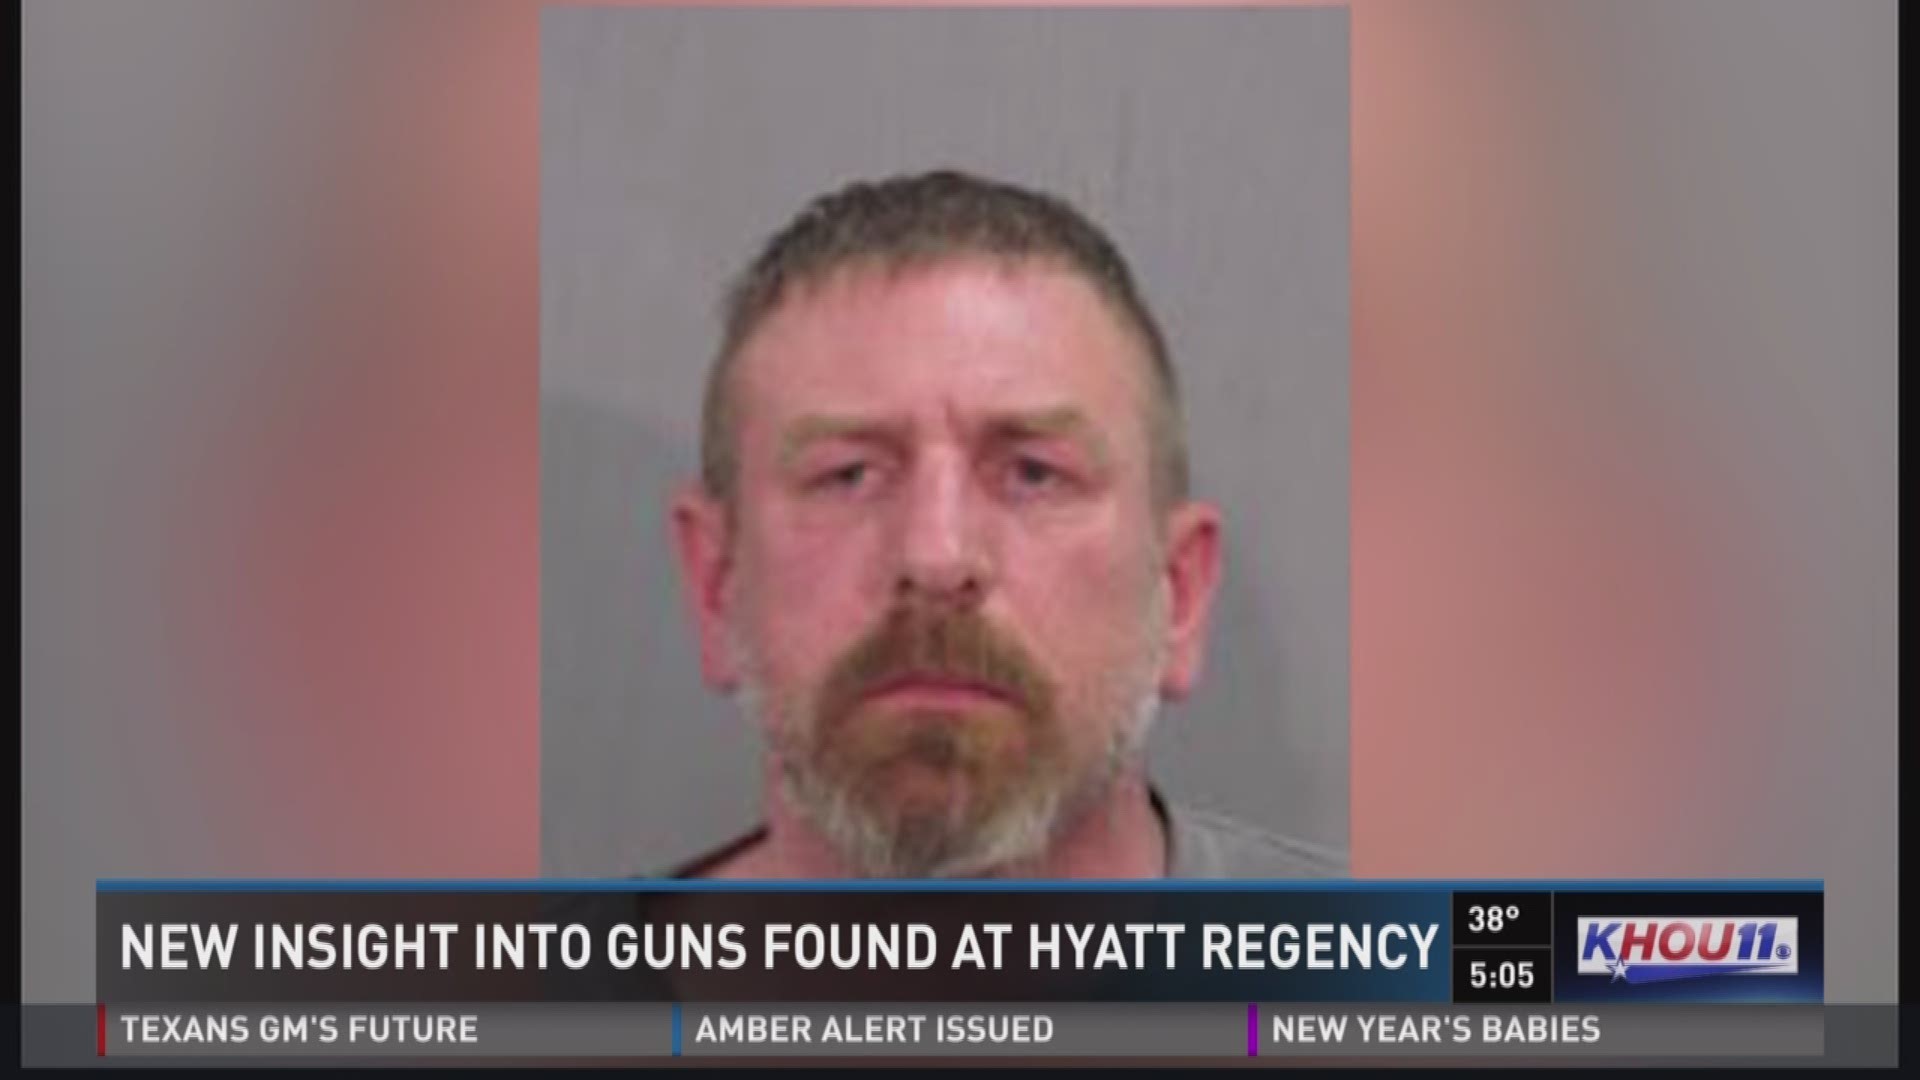 Police on Monday released the mugshot of Russell Ziemba, who they say was found with several guns and ammunition in his Hyatt Regency hotel room downtown.